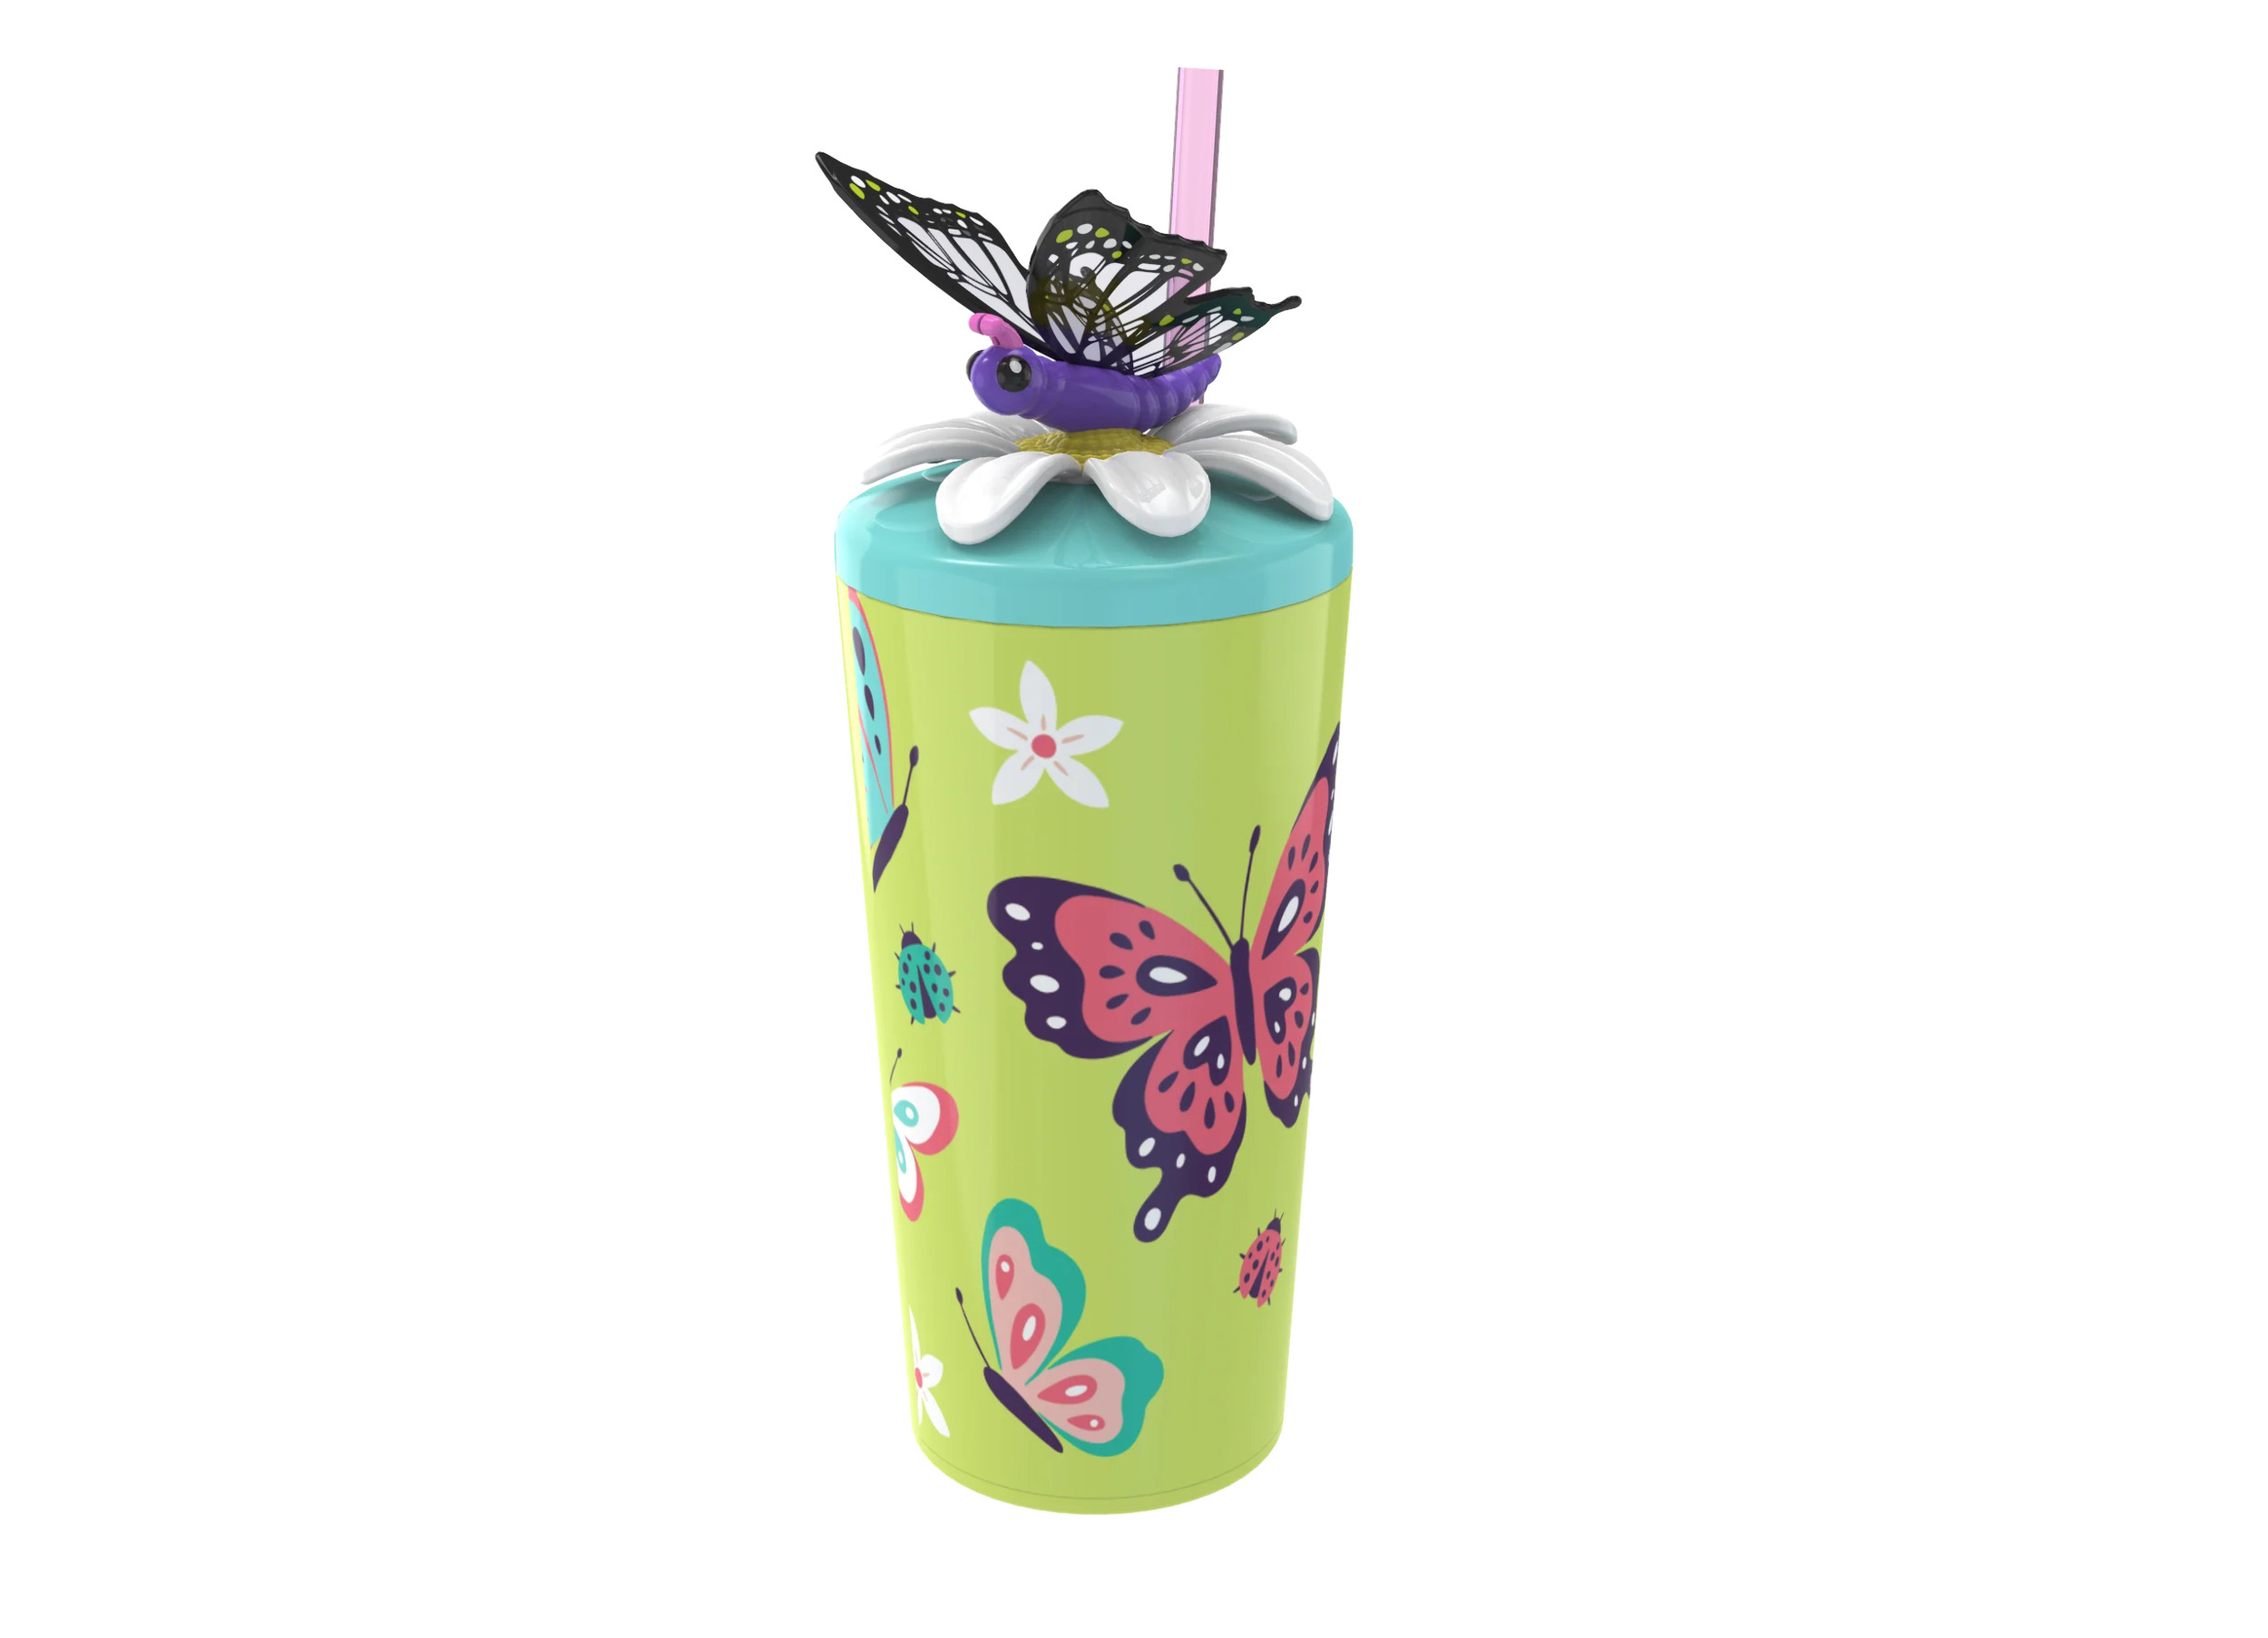 Cool Gear 4-Pack 18 oz Fun Toppers Butterfly Character Lid Tumblers with straw included | Durable, Reusable Water Bottle Gift for Kids, Adults - image 3 of 5